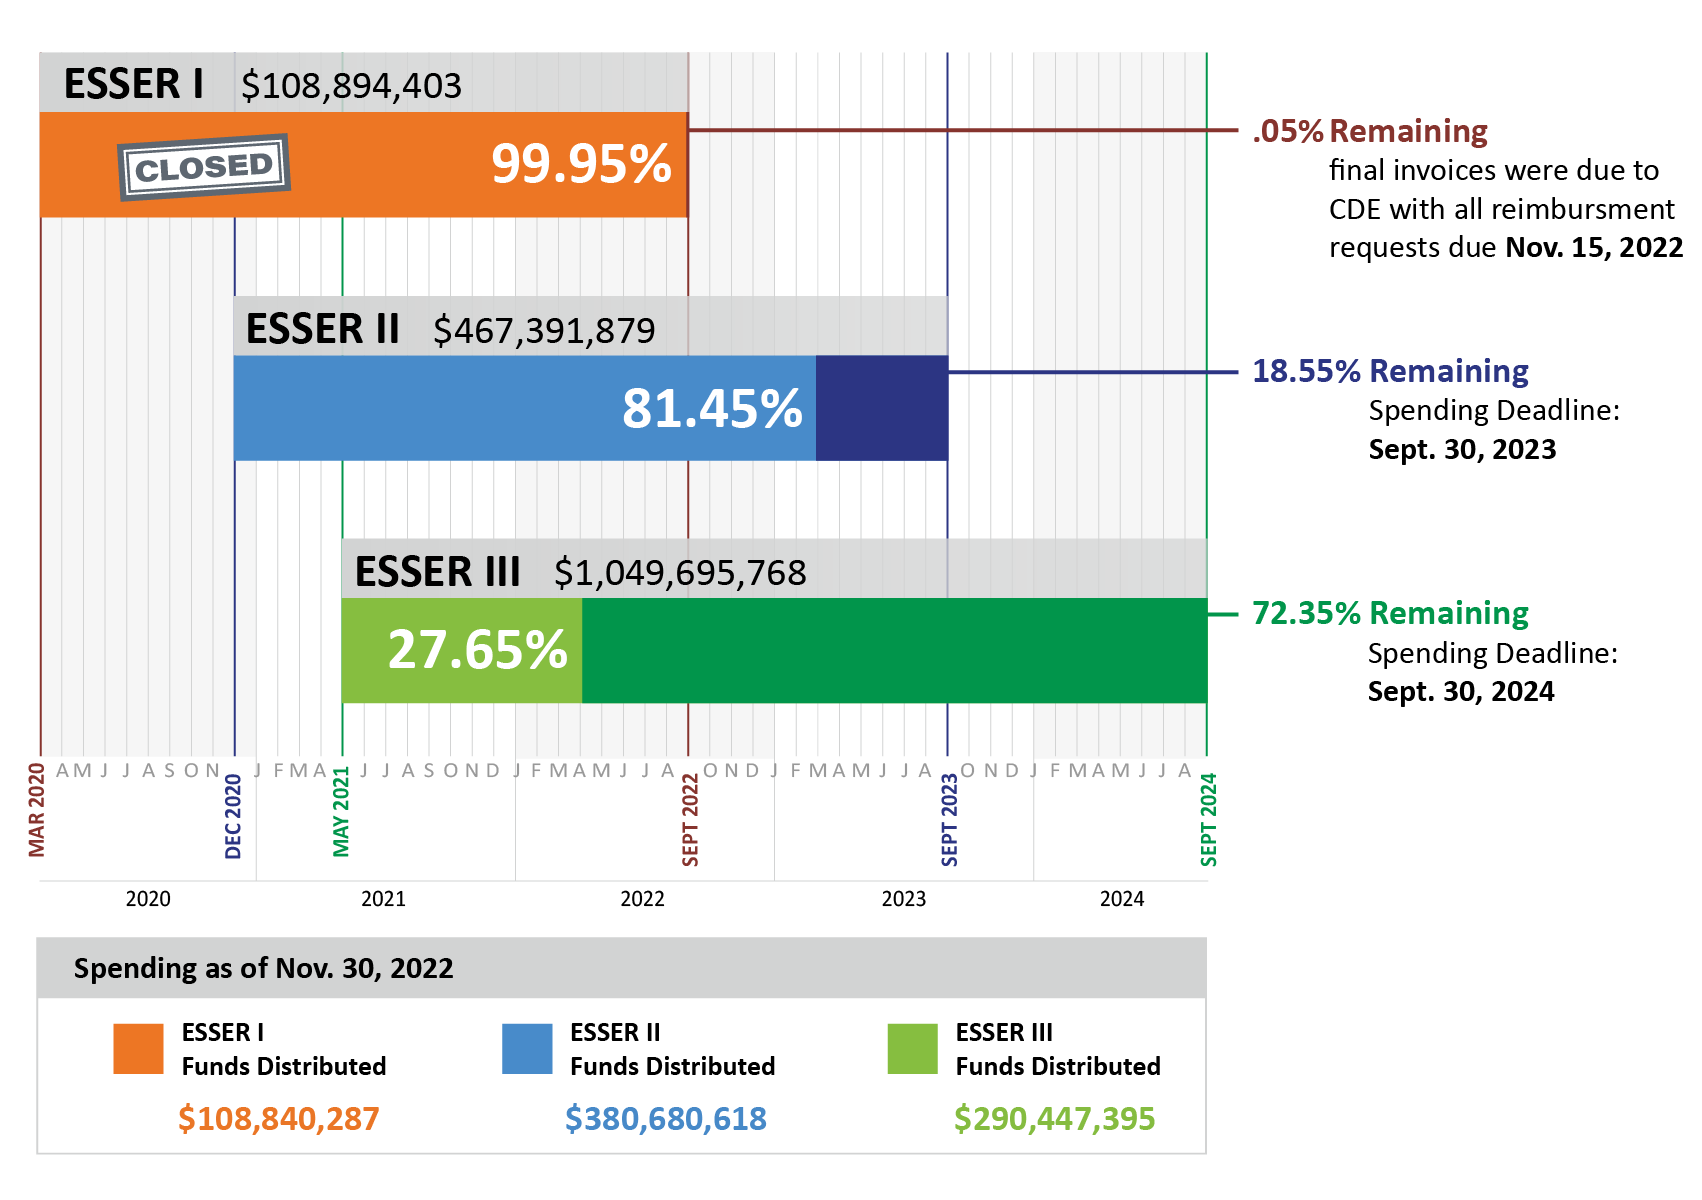 Chart with time frame showing March 2020 to September 2024. ESSER 1: $108,894,403.80, closed, 98%. 2% remaining, final invoices due to CDE with all reimbursement requests due November 15, 2022. ESSER 2: $467,391,879.90, 71%, 29% remaining, Spending Deadline: September 30, 2023. ESSER 3: $1,049,695,768.90 15%, 85% remaining, spending deadline: September 30, 2024.